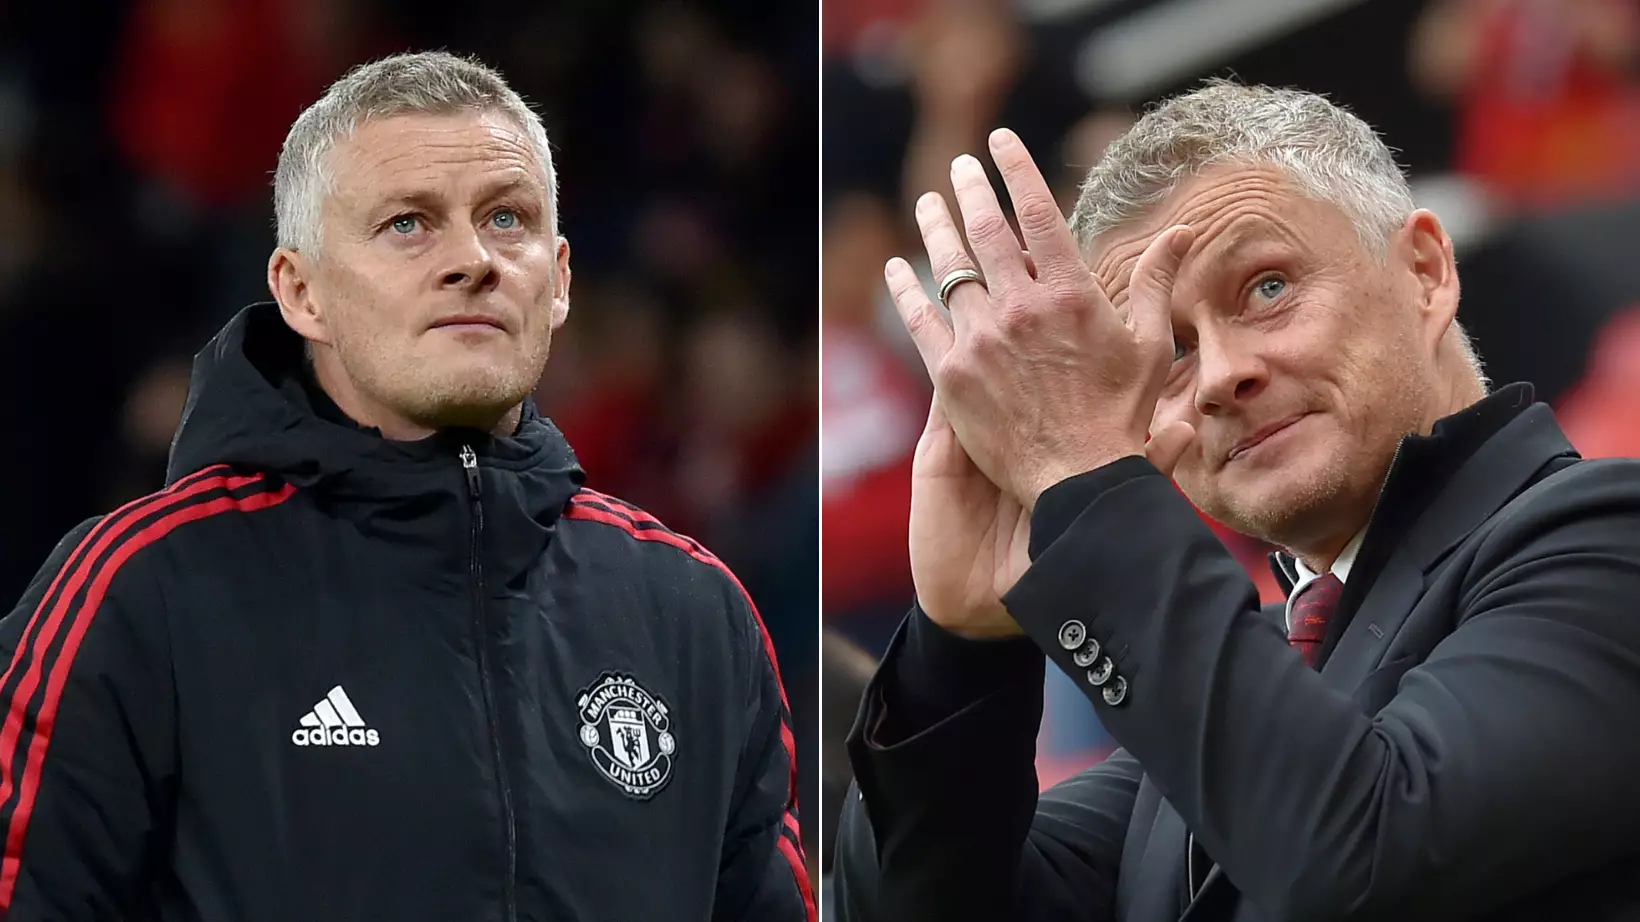 Man United Will Be Forced To Pay Eye-Watering Fee If They Sack Ole Gunnar Solskjaer